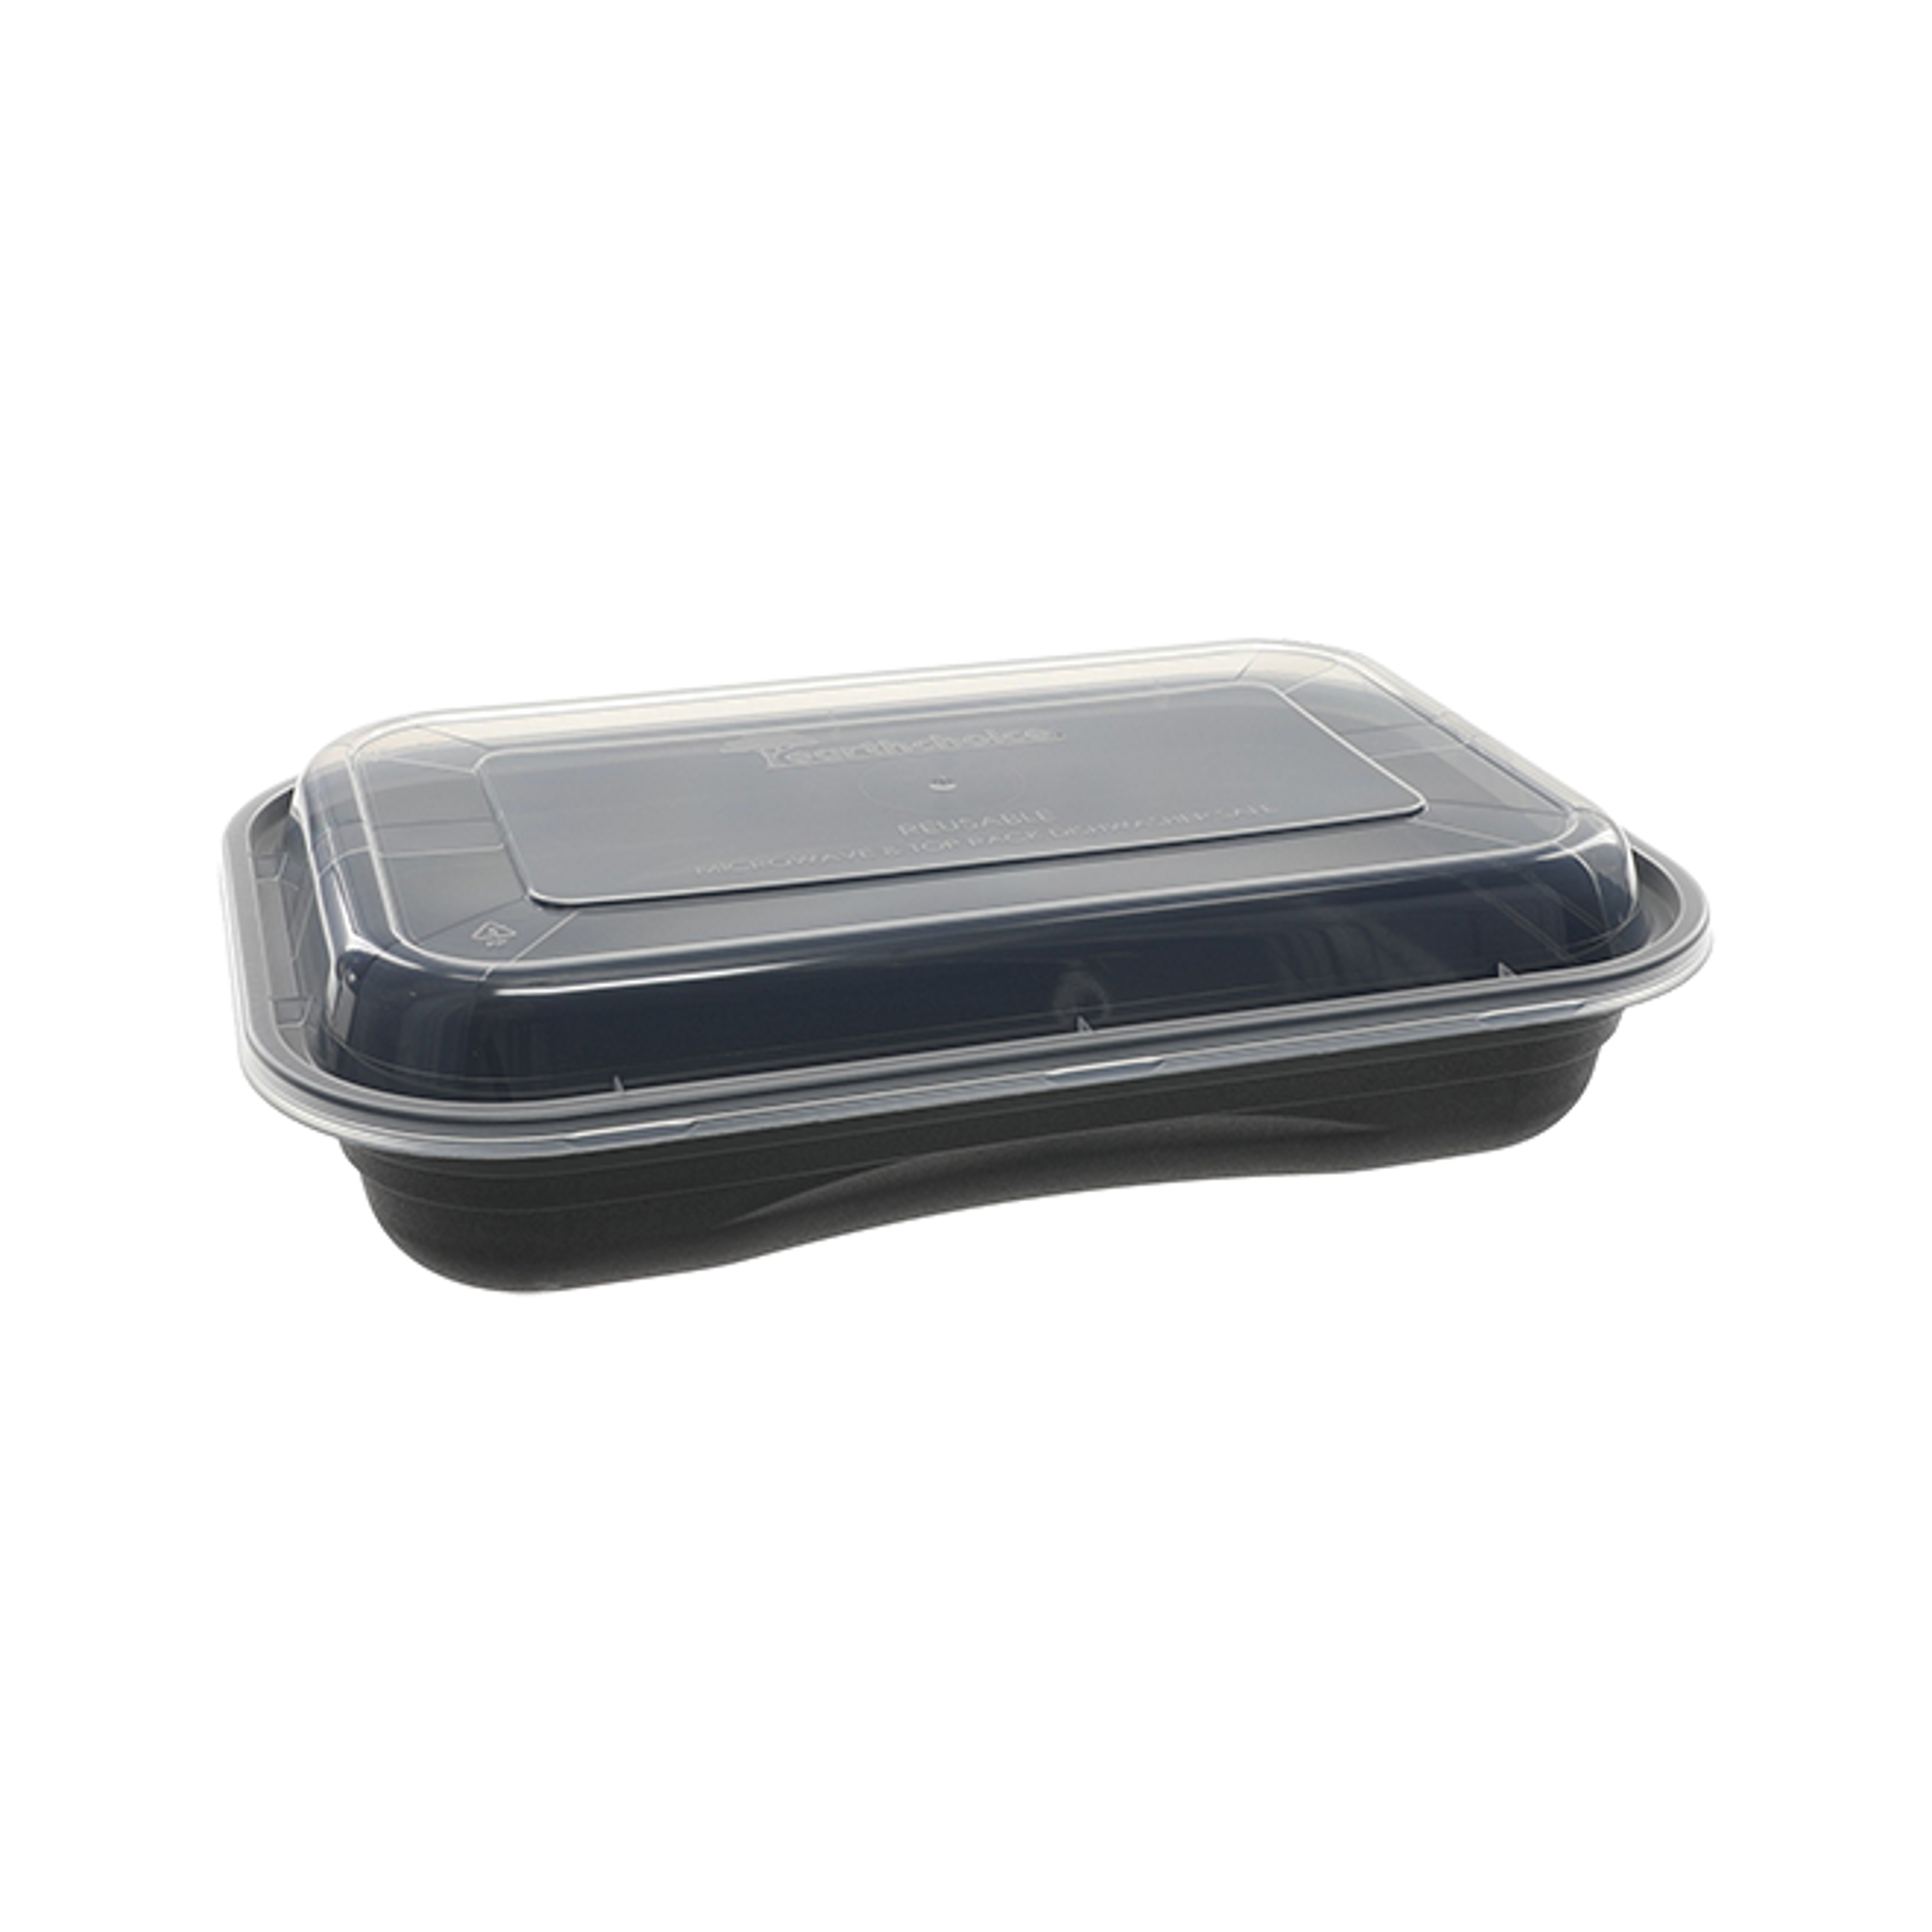 6x8” Microwavable Black 2 Compartment Base